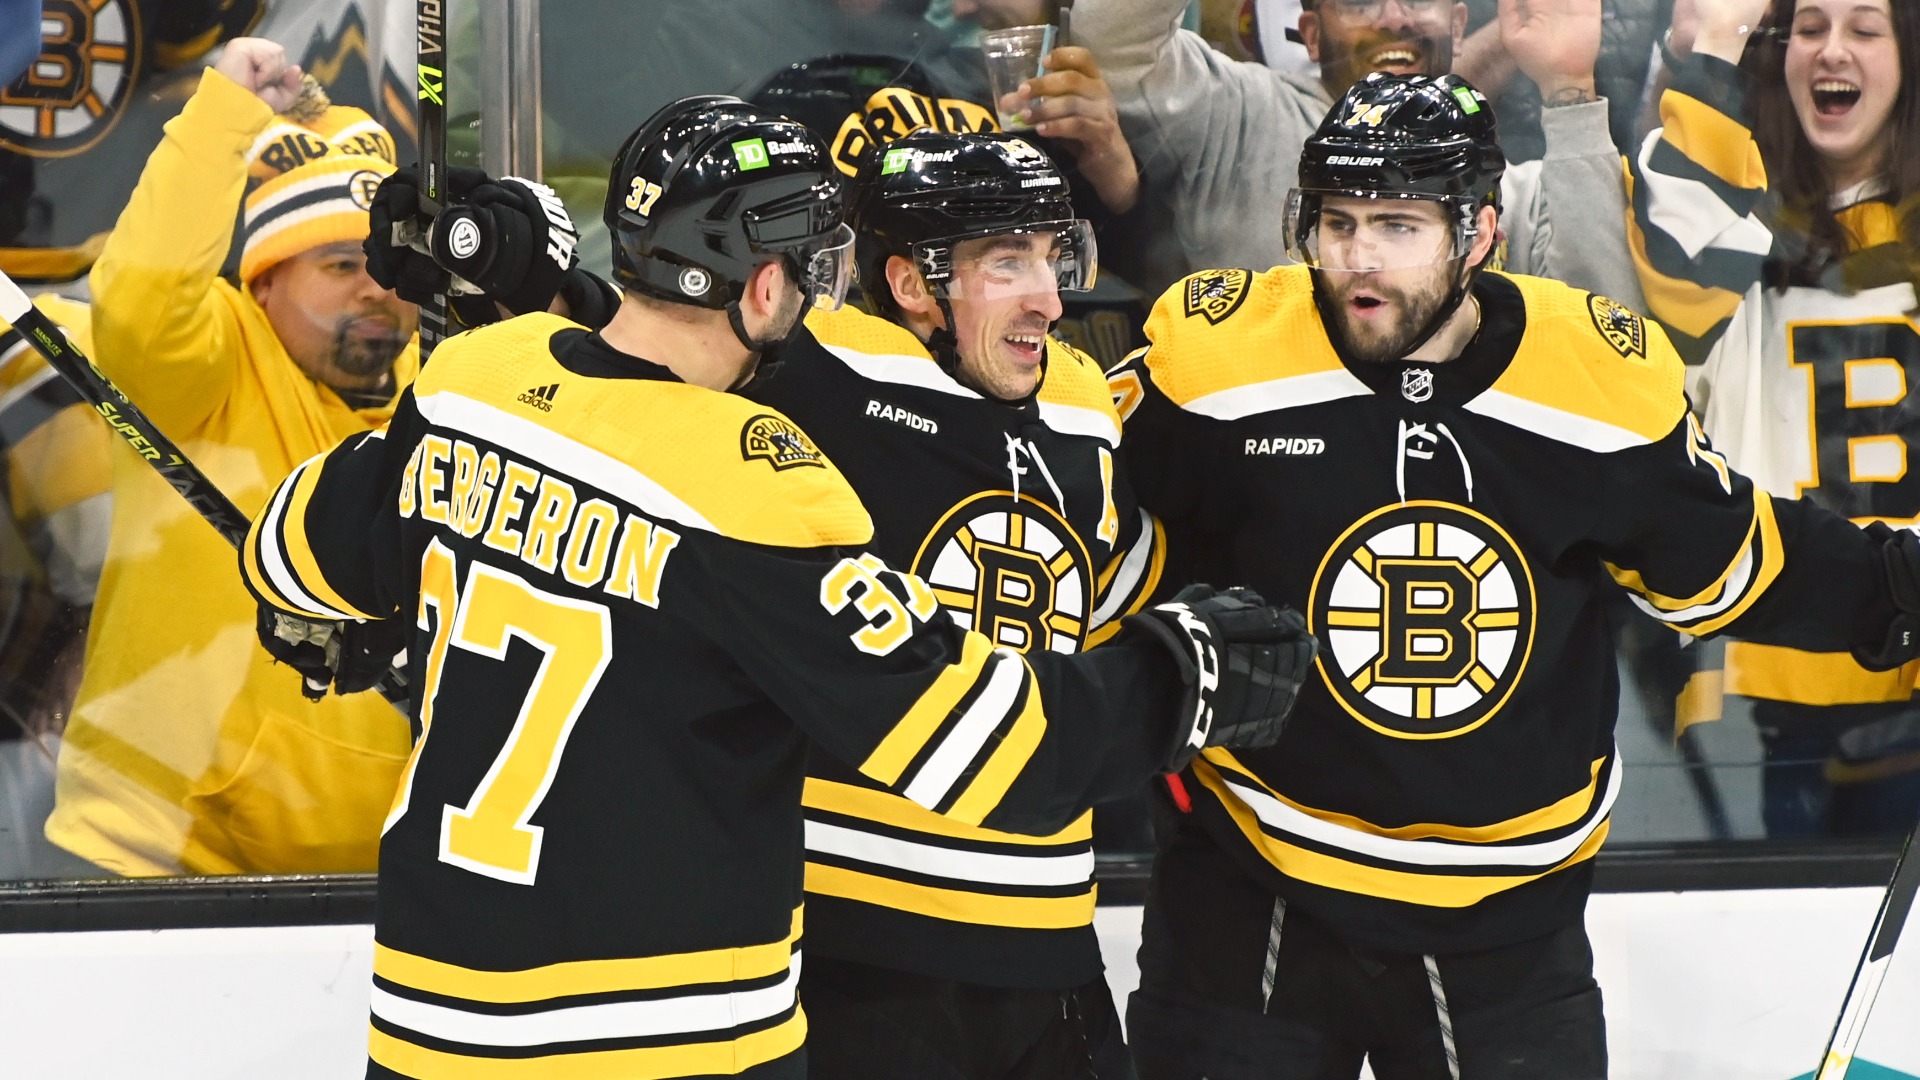 Bruins Fans Hold Breath After Charlie McAvoy Gets Cross Check To Face